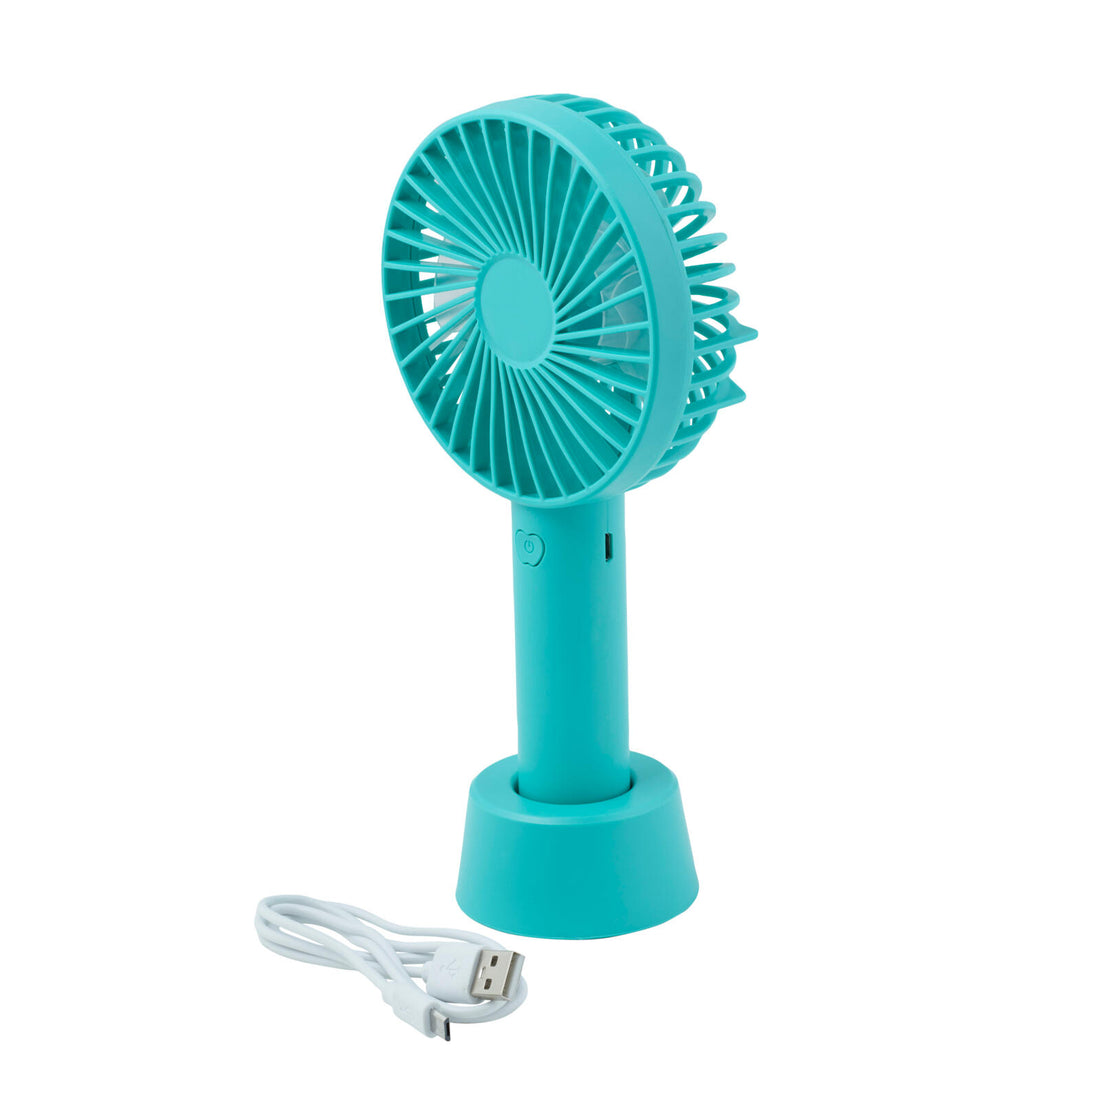 FANNY Fan with turquoise usb